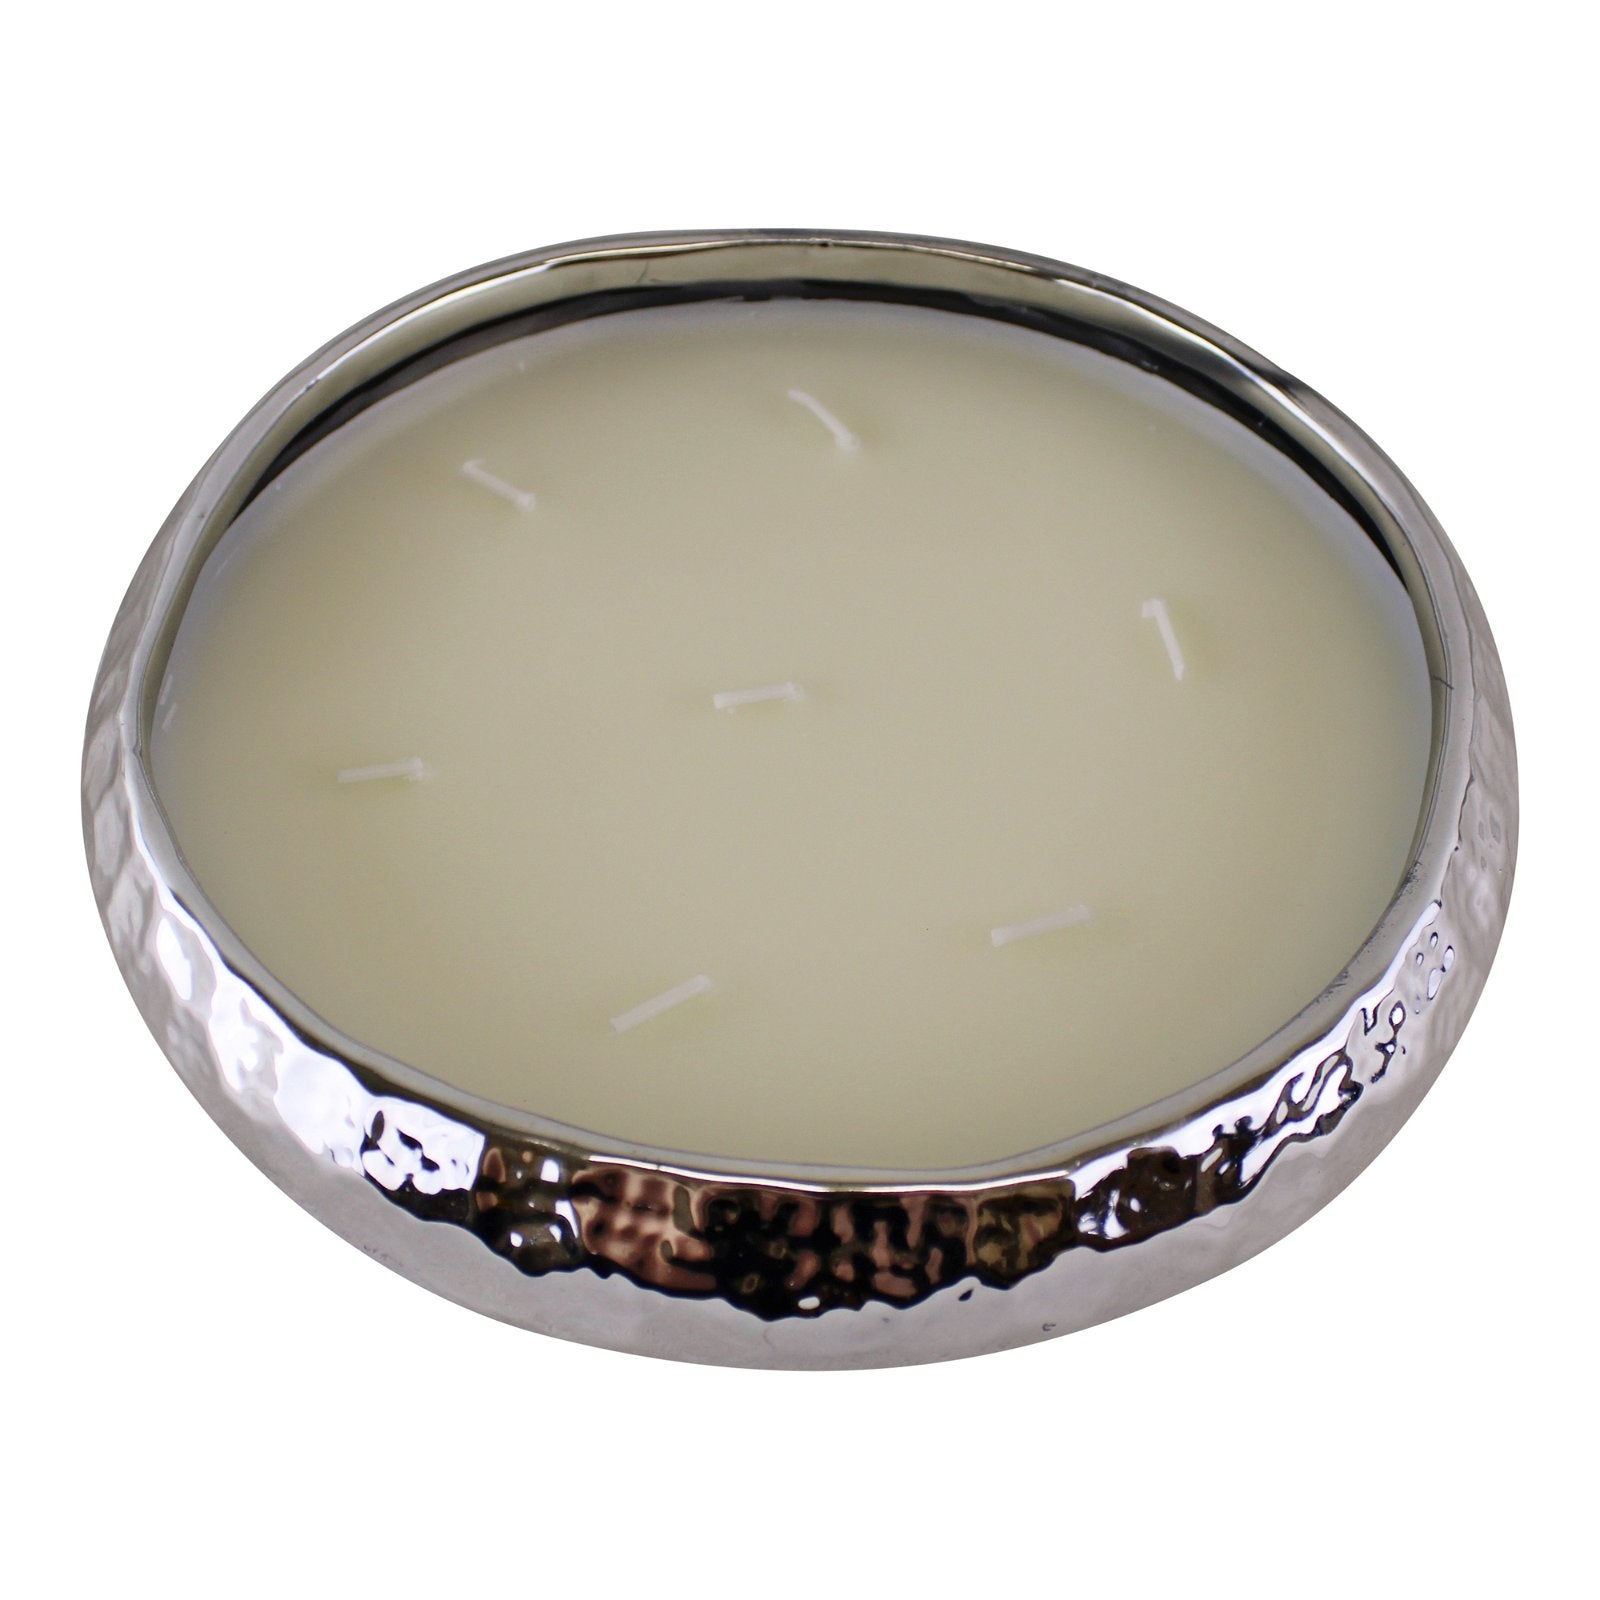 Silver Ceramic Bowl With 7 Wick Sandalwood Fragranced Candle